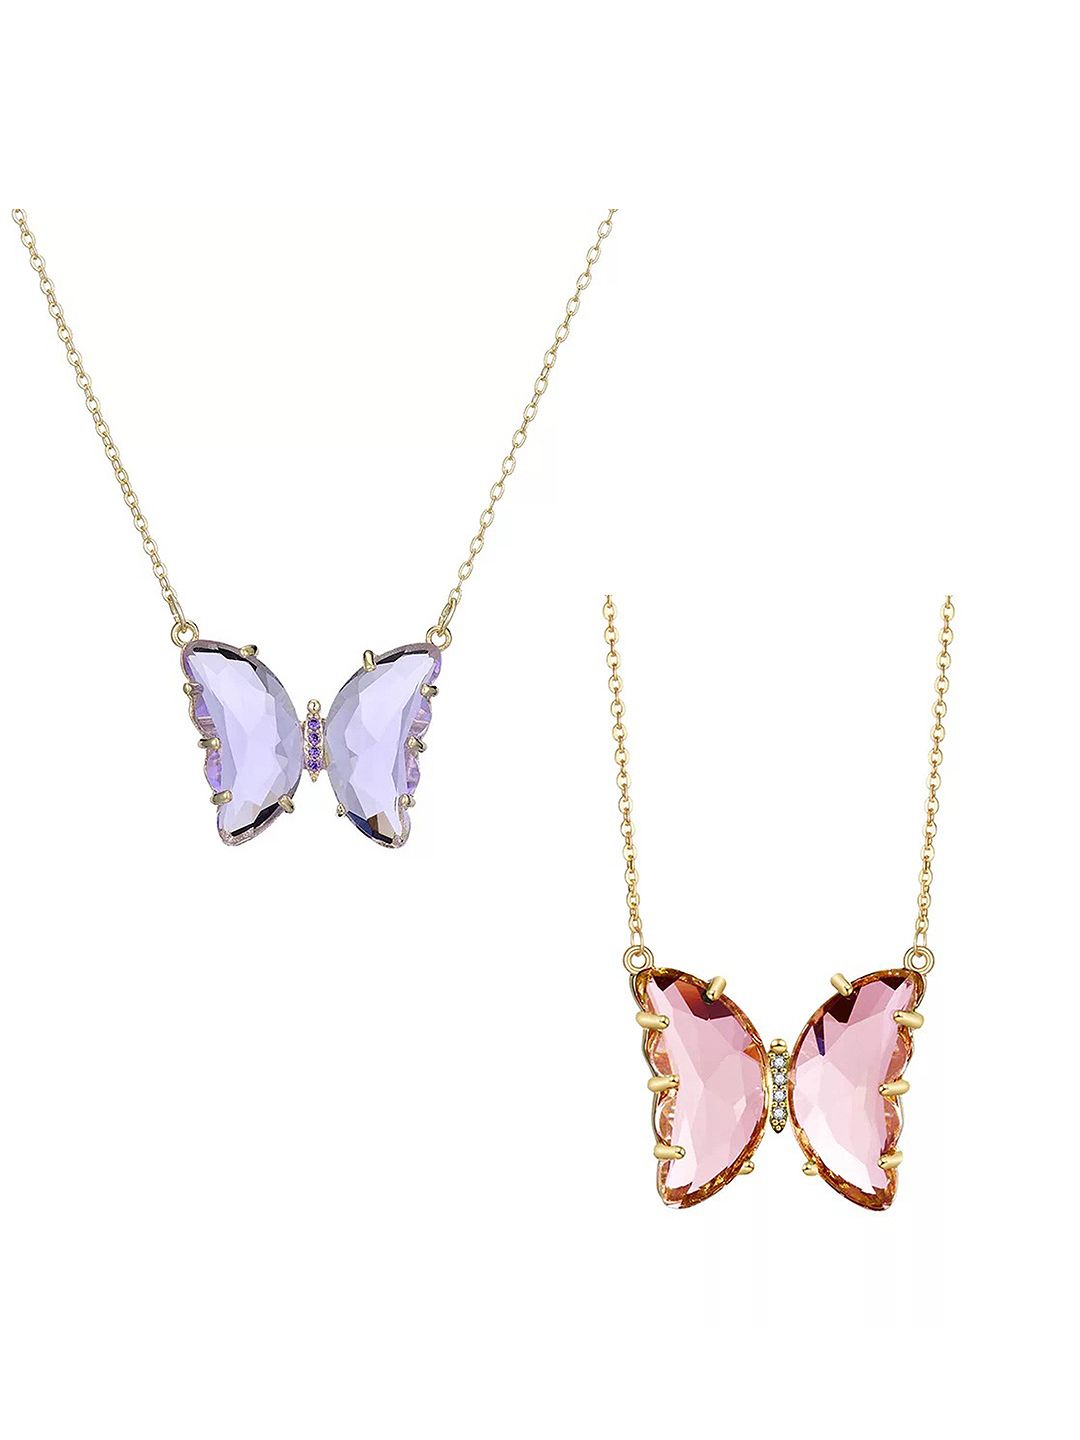 Vembley Set of 2 Gold-Plated Crystal Butterfly Pendant Necklaces Price in India